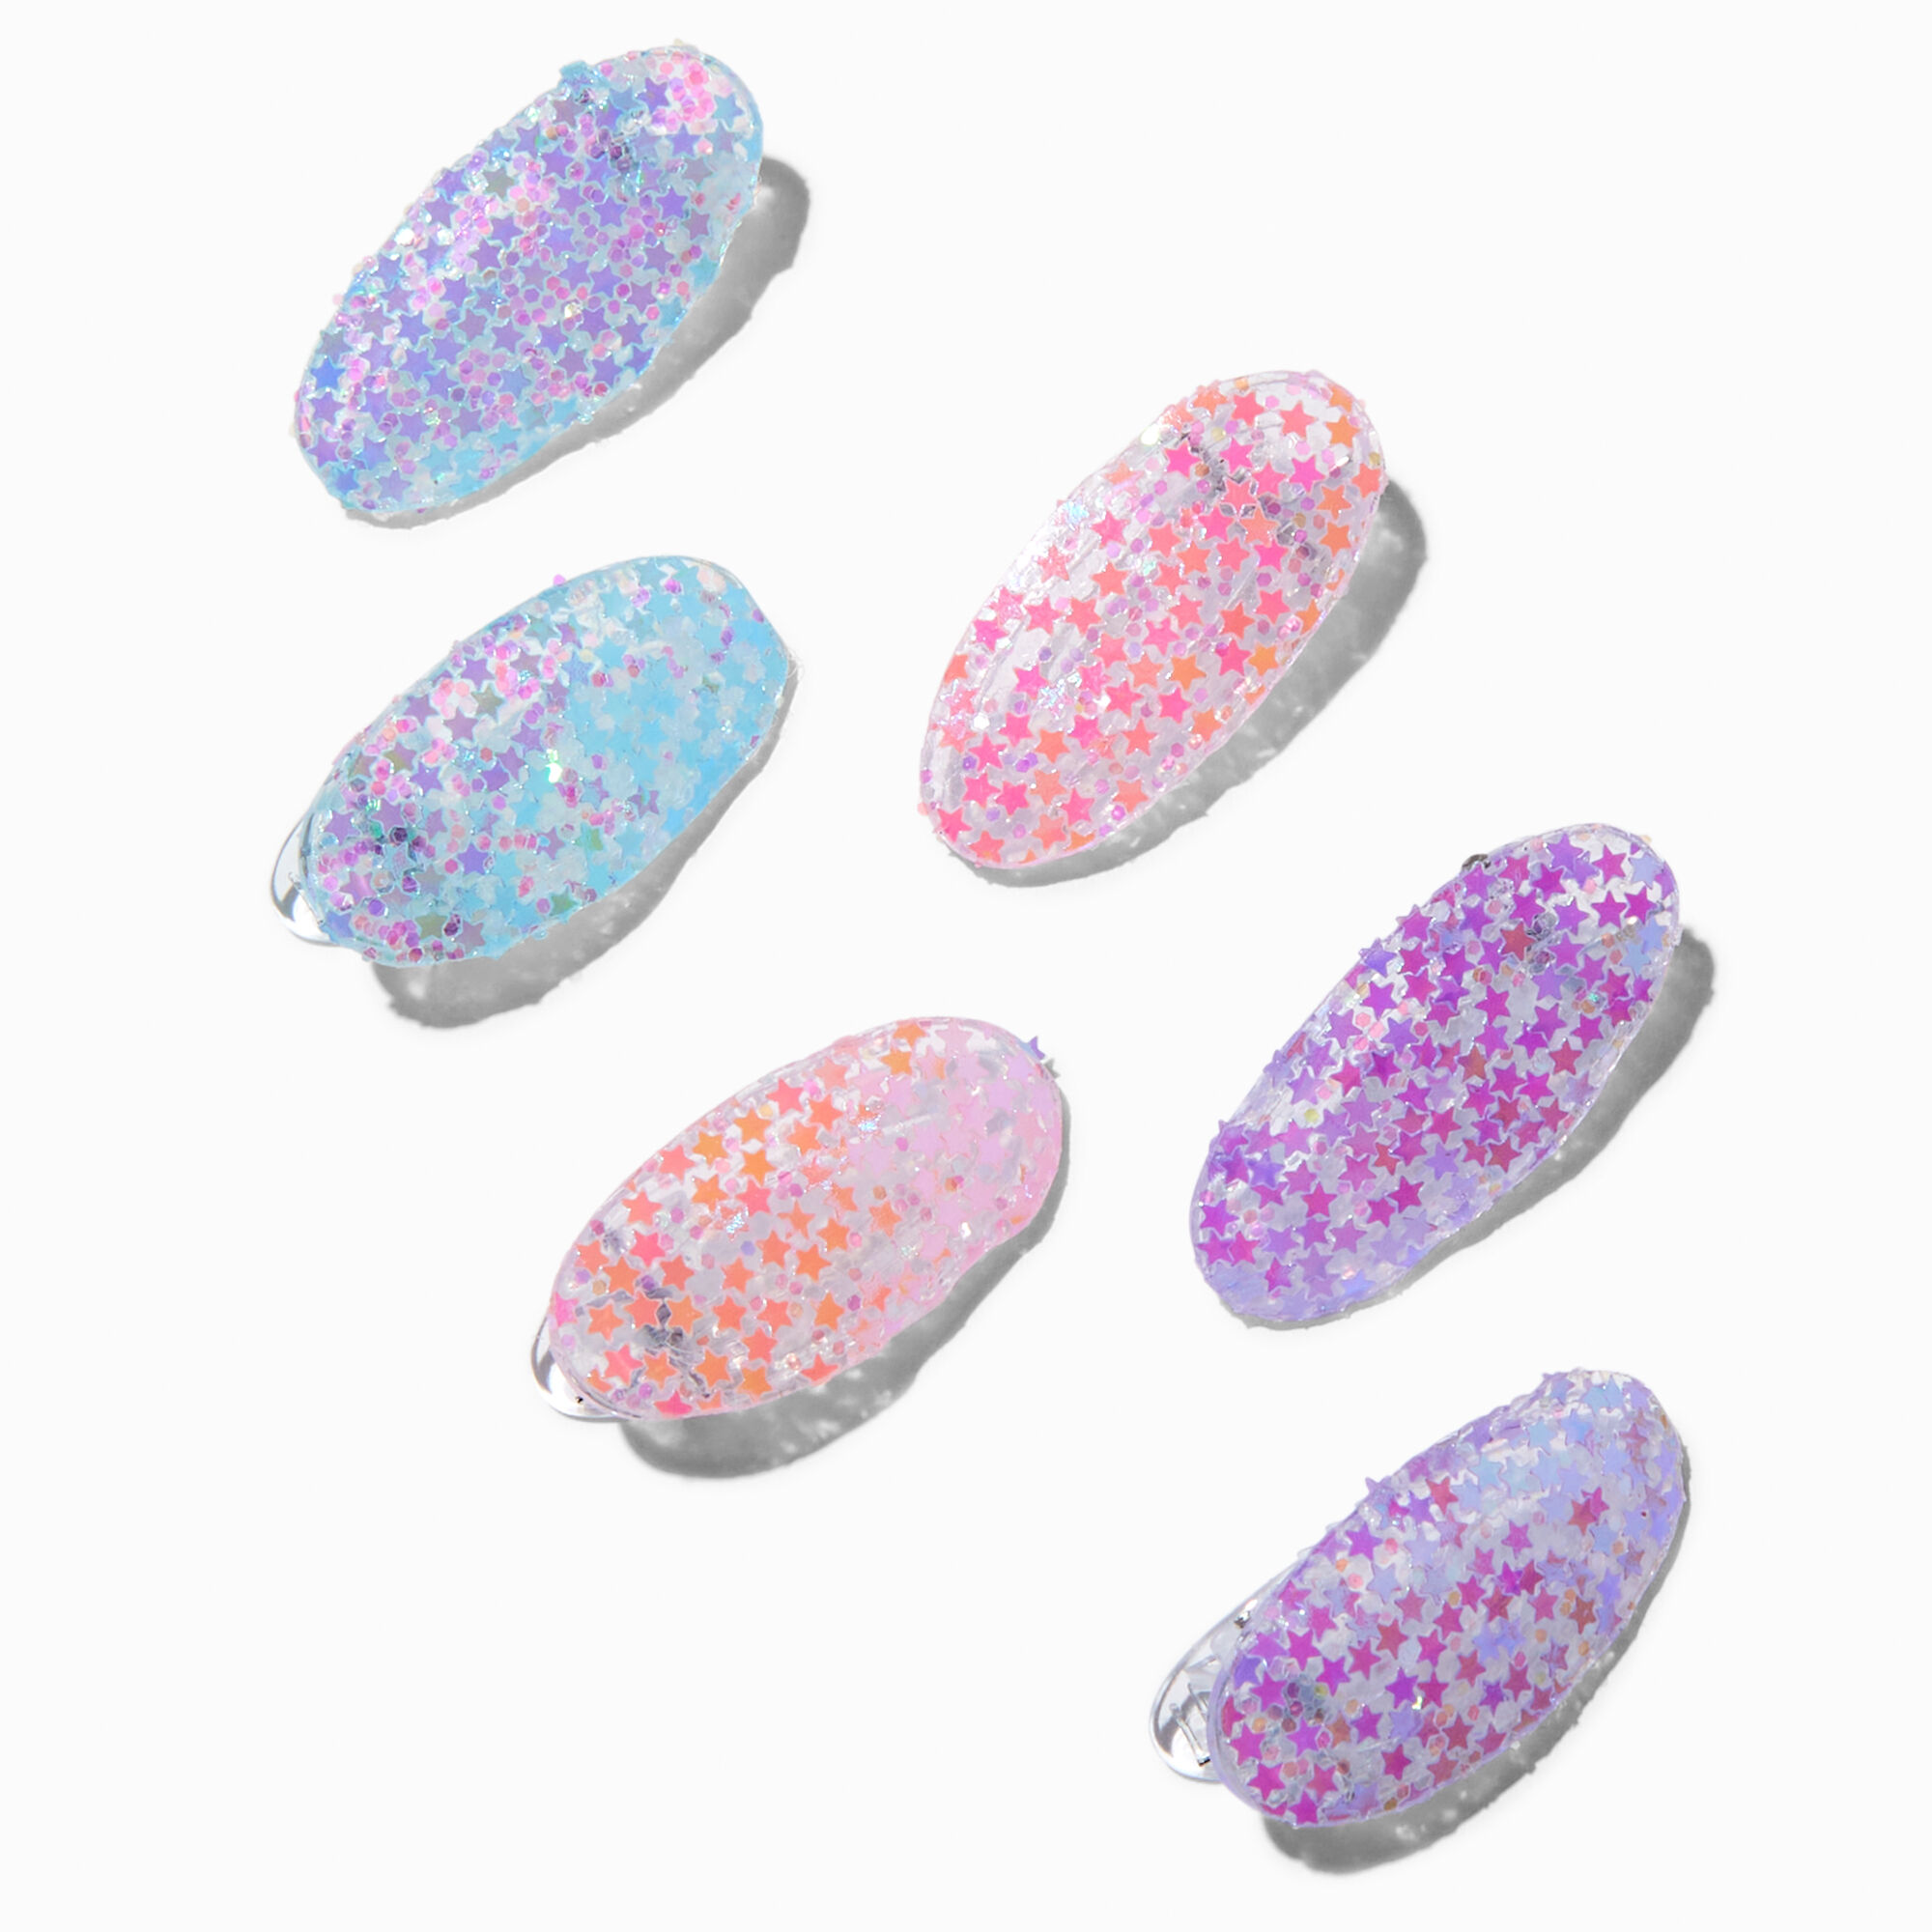 View Claires Club Mermaid Star Glitter Hair Clips 6 Pack information